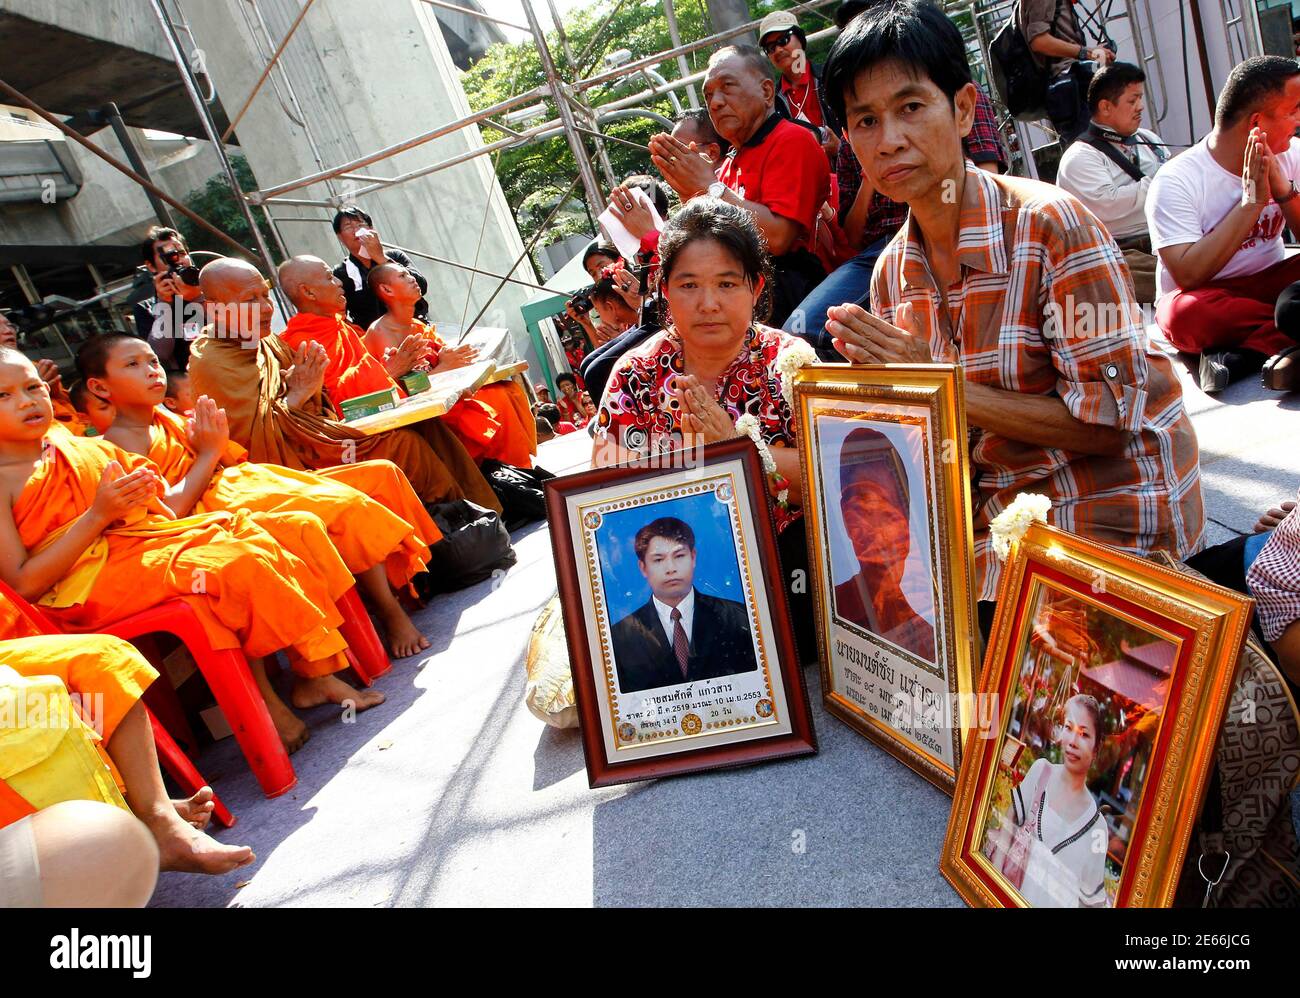 Relatives pray for their loved ones who lost their lives in the government crackdown on red shirt protesters during a gathering to mark its second anniversary at Ratchaprasong intersection in Bangkok May 19, 2012. Red shirts gathered to mark the two year anniversary of a government crack down that left 91 people dead and over 2,000 injured.  REUTERS/Sukree Sukplang (THAILAND - Tags: POLITICS CIVIL UNREST) Stock Photo